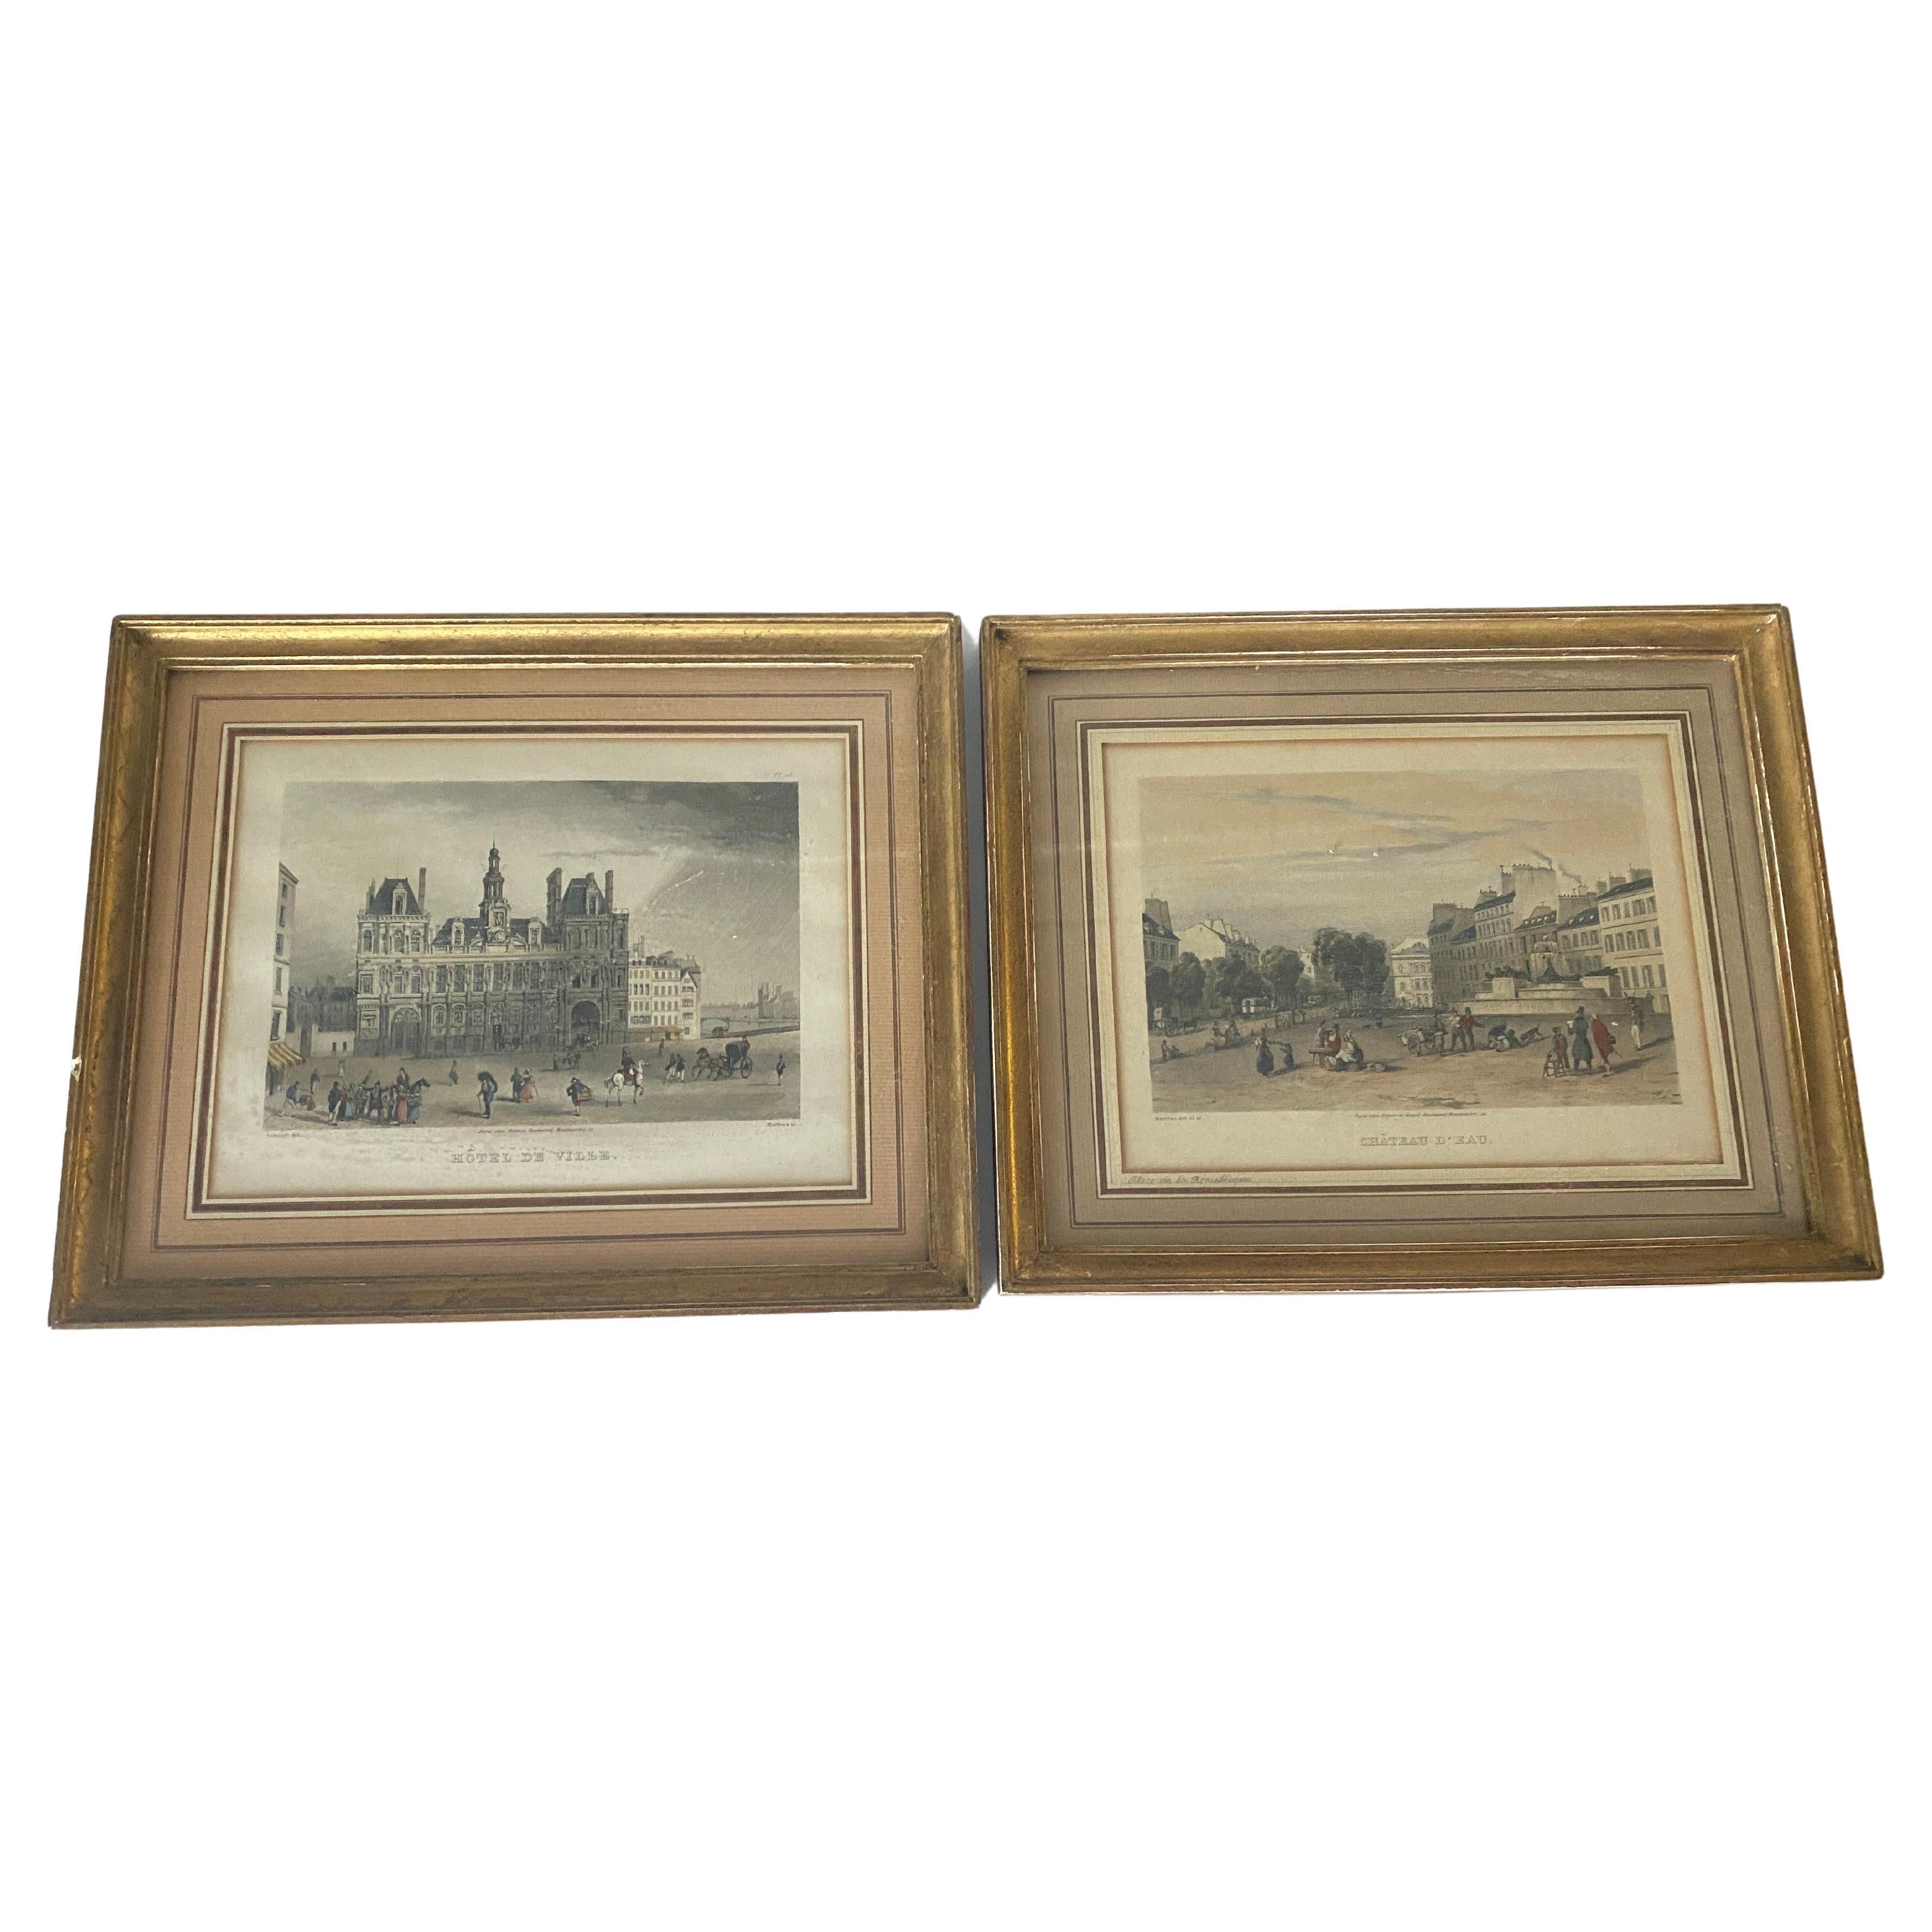 These are a pair of engraving, in color. They are representing, monuments of the city of Paris. They have been done durong the 19th century in France.